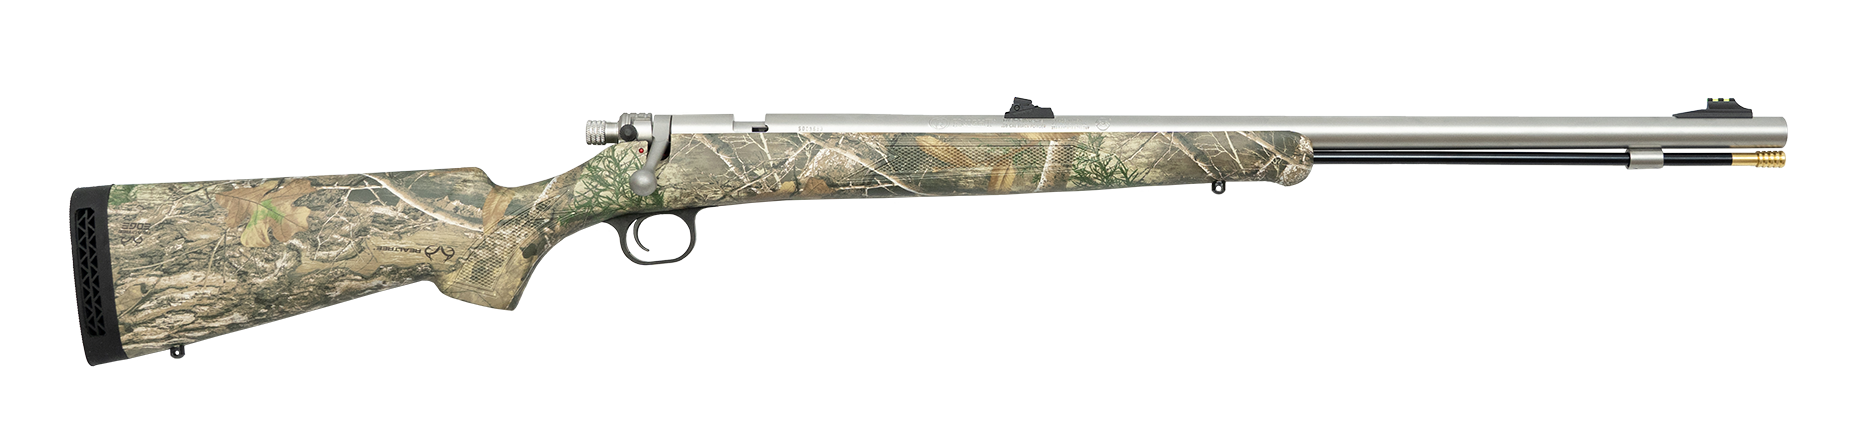 DISC Extreme .52 Straight - Real Tree Edge Muzzleloader